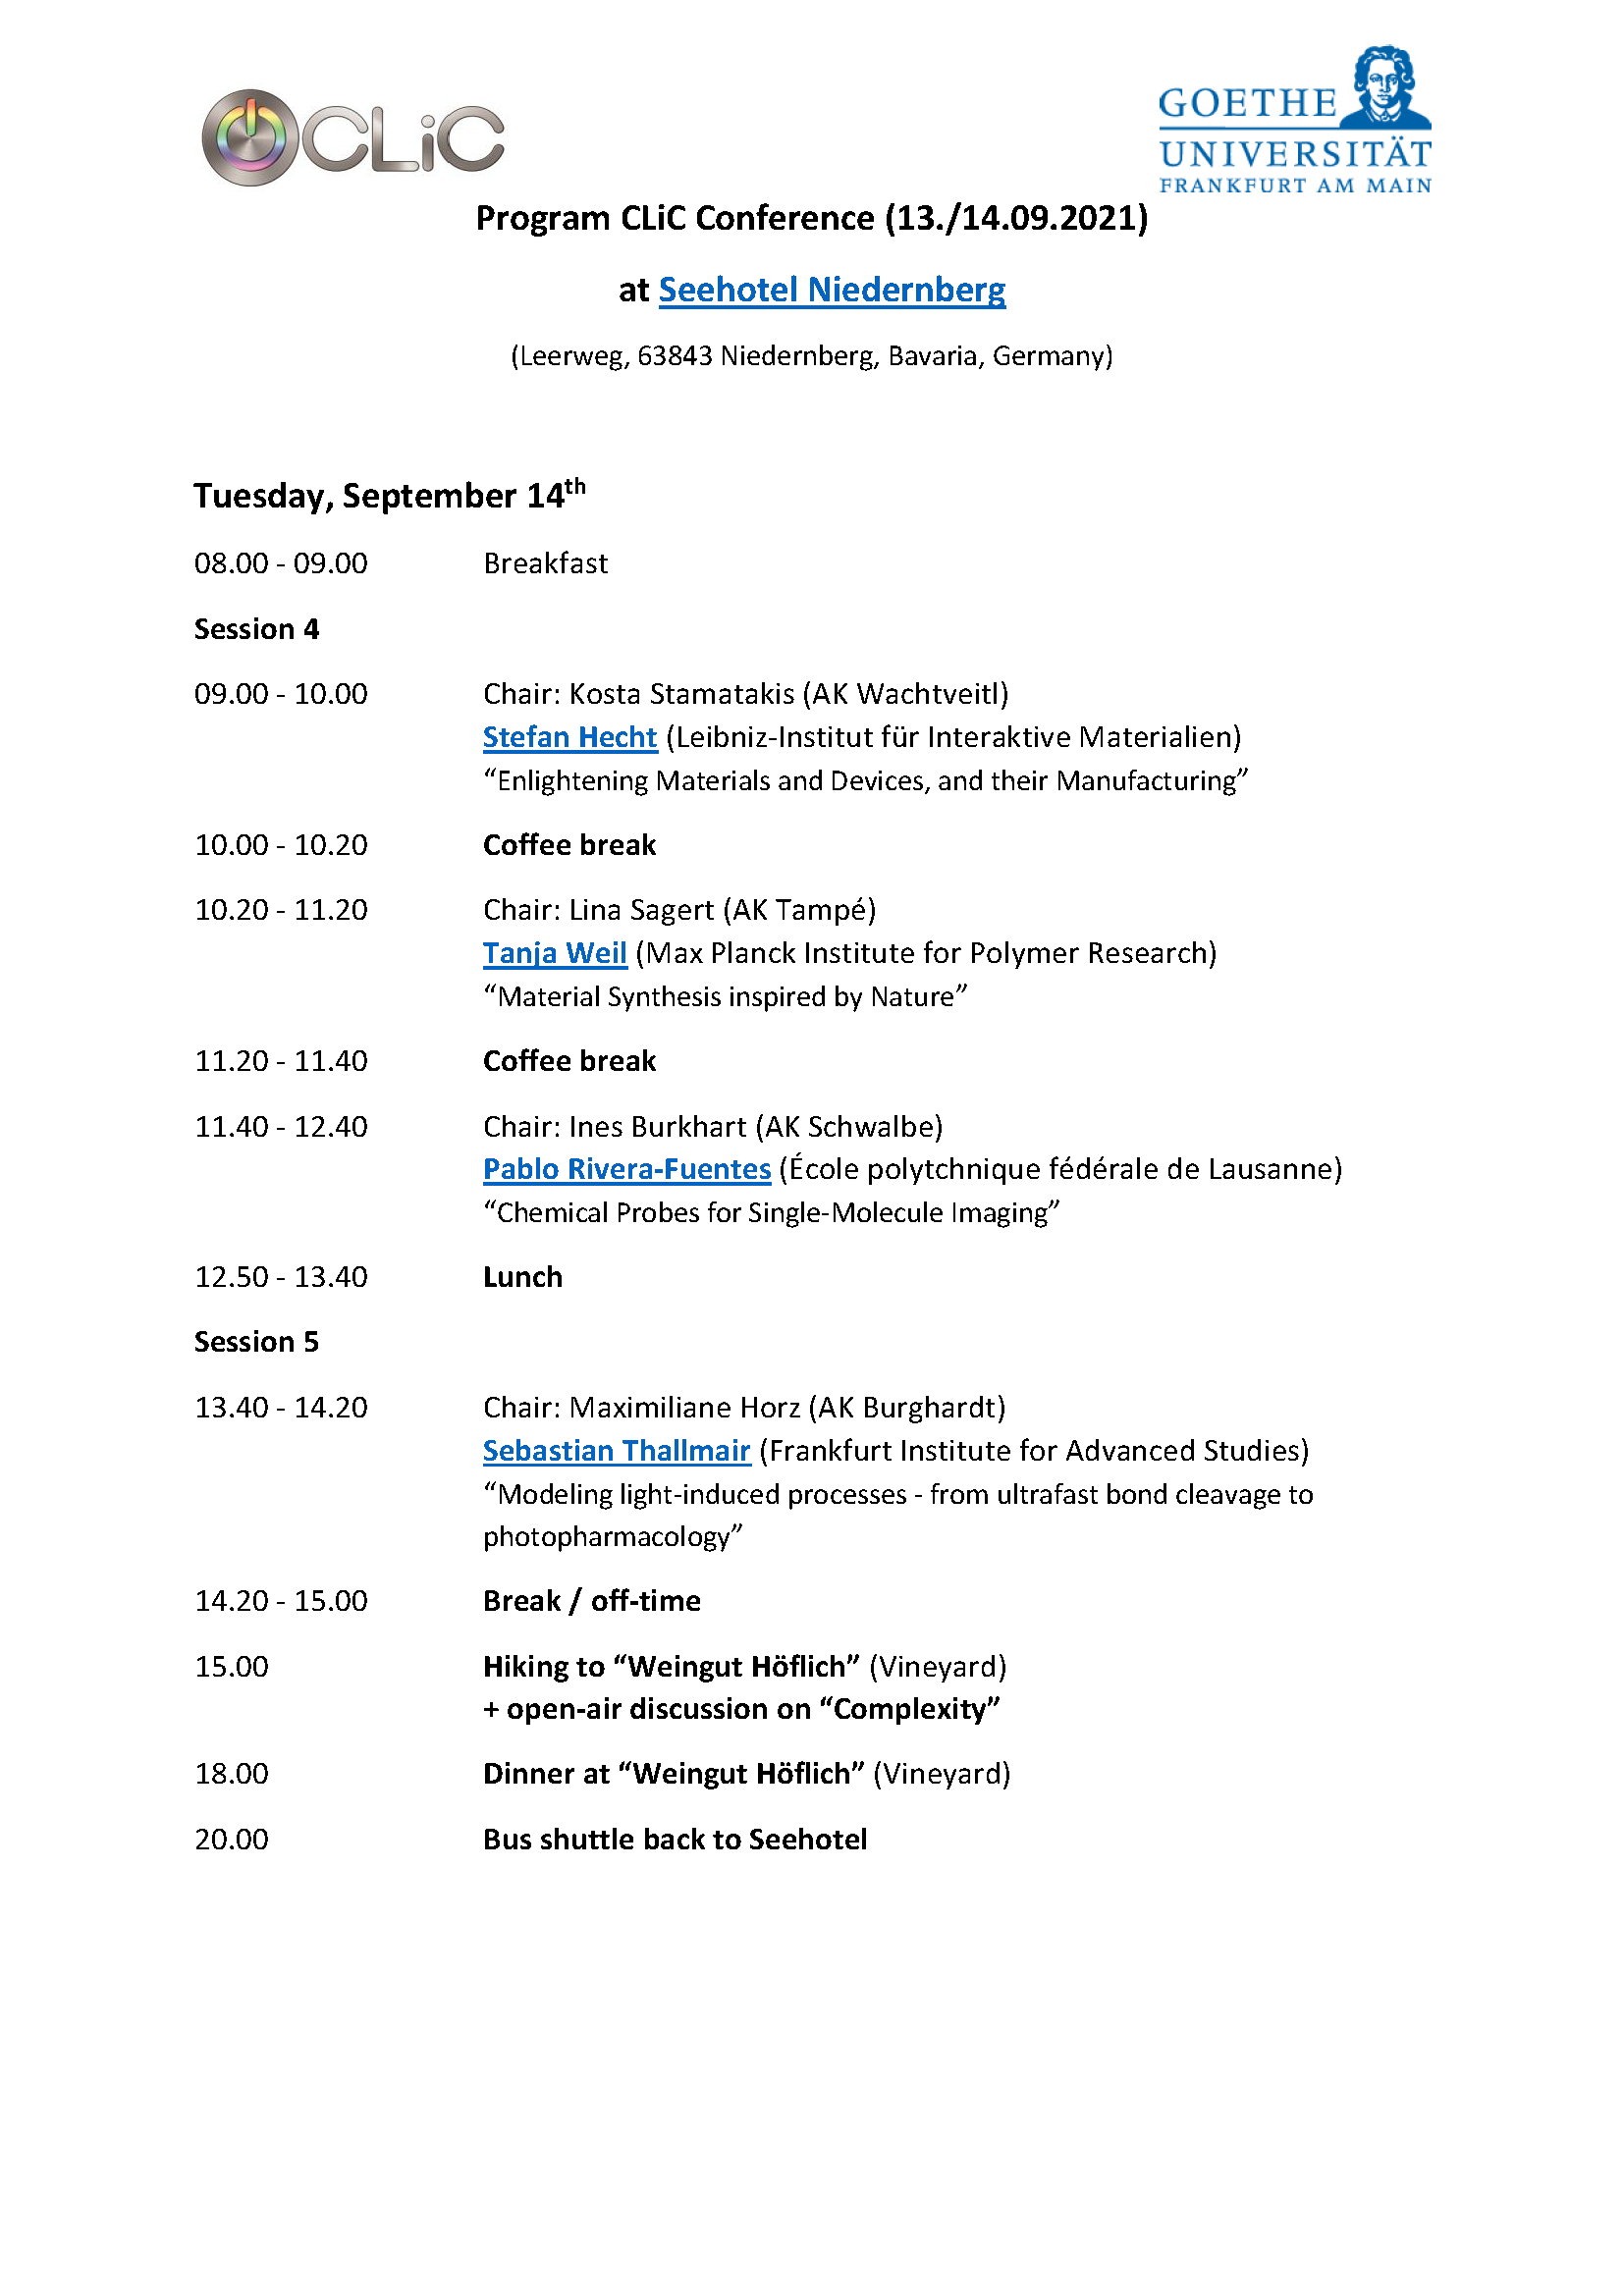 Program CLiC Conference 2021 mit open air discussion Page 2